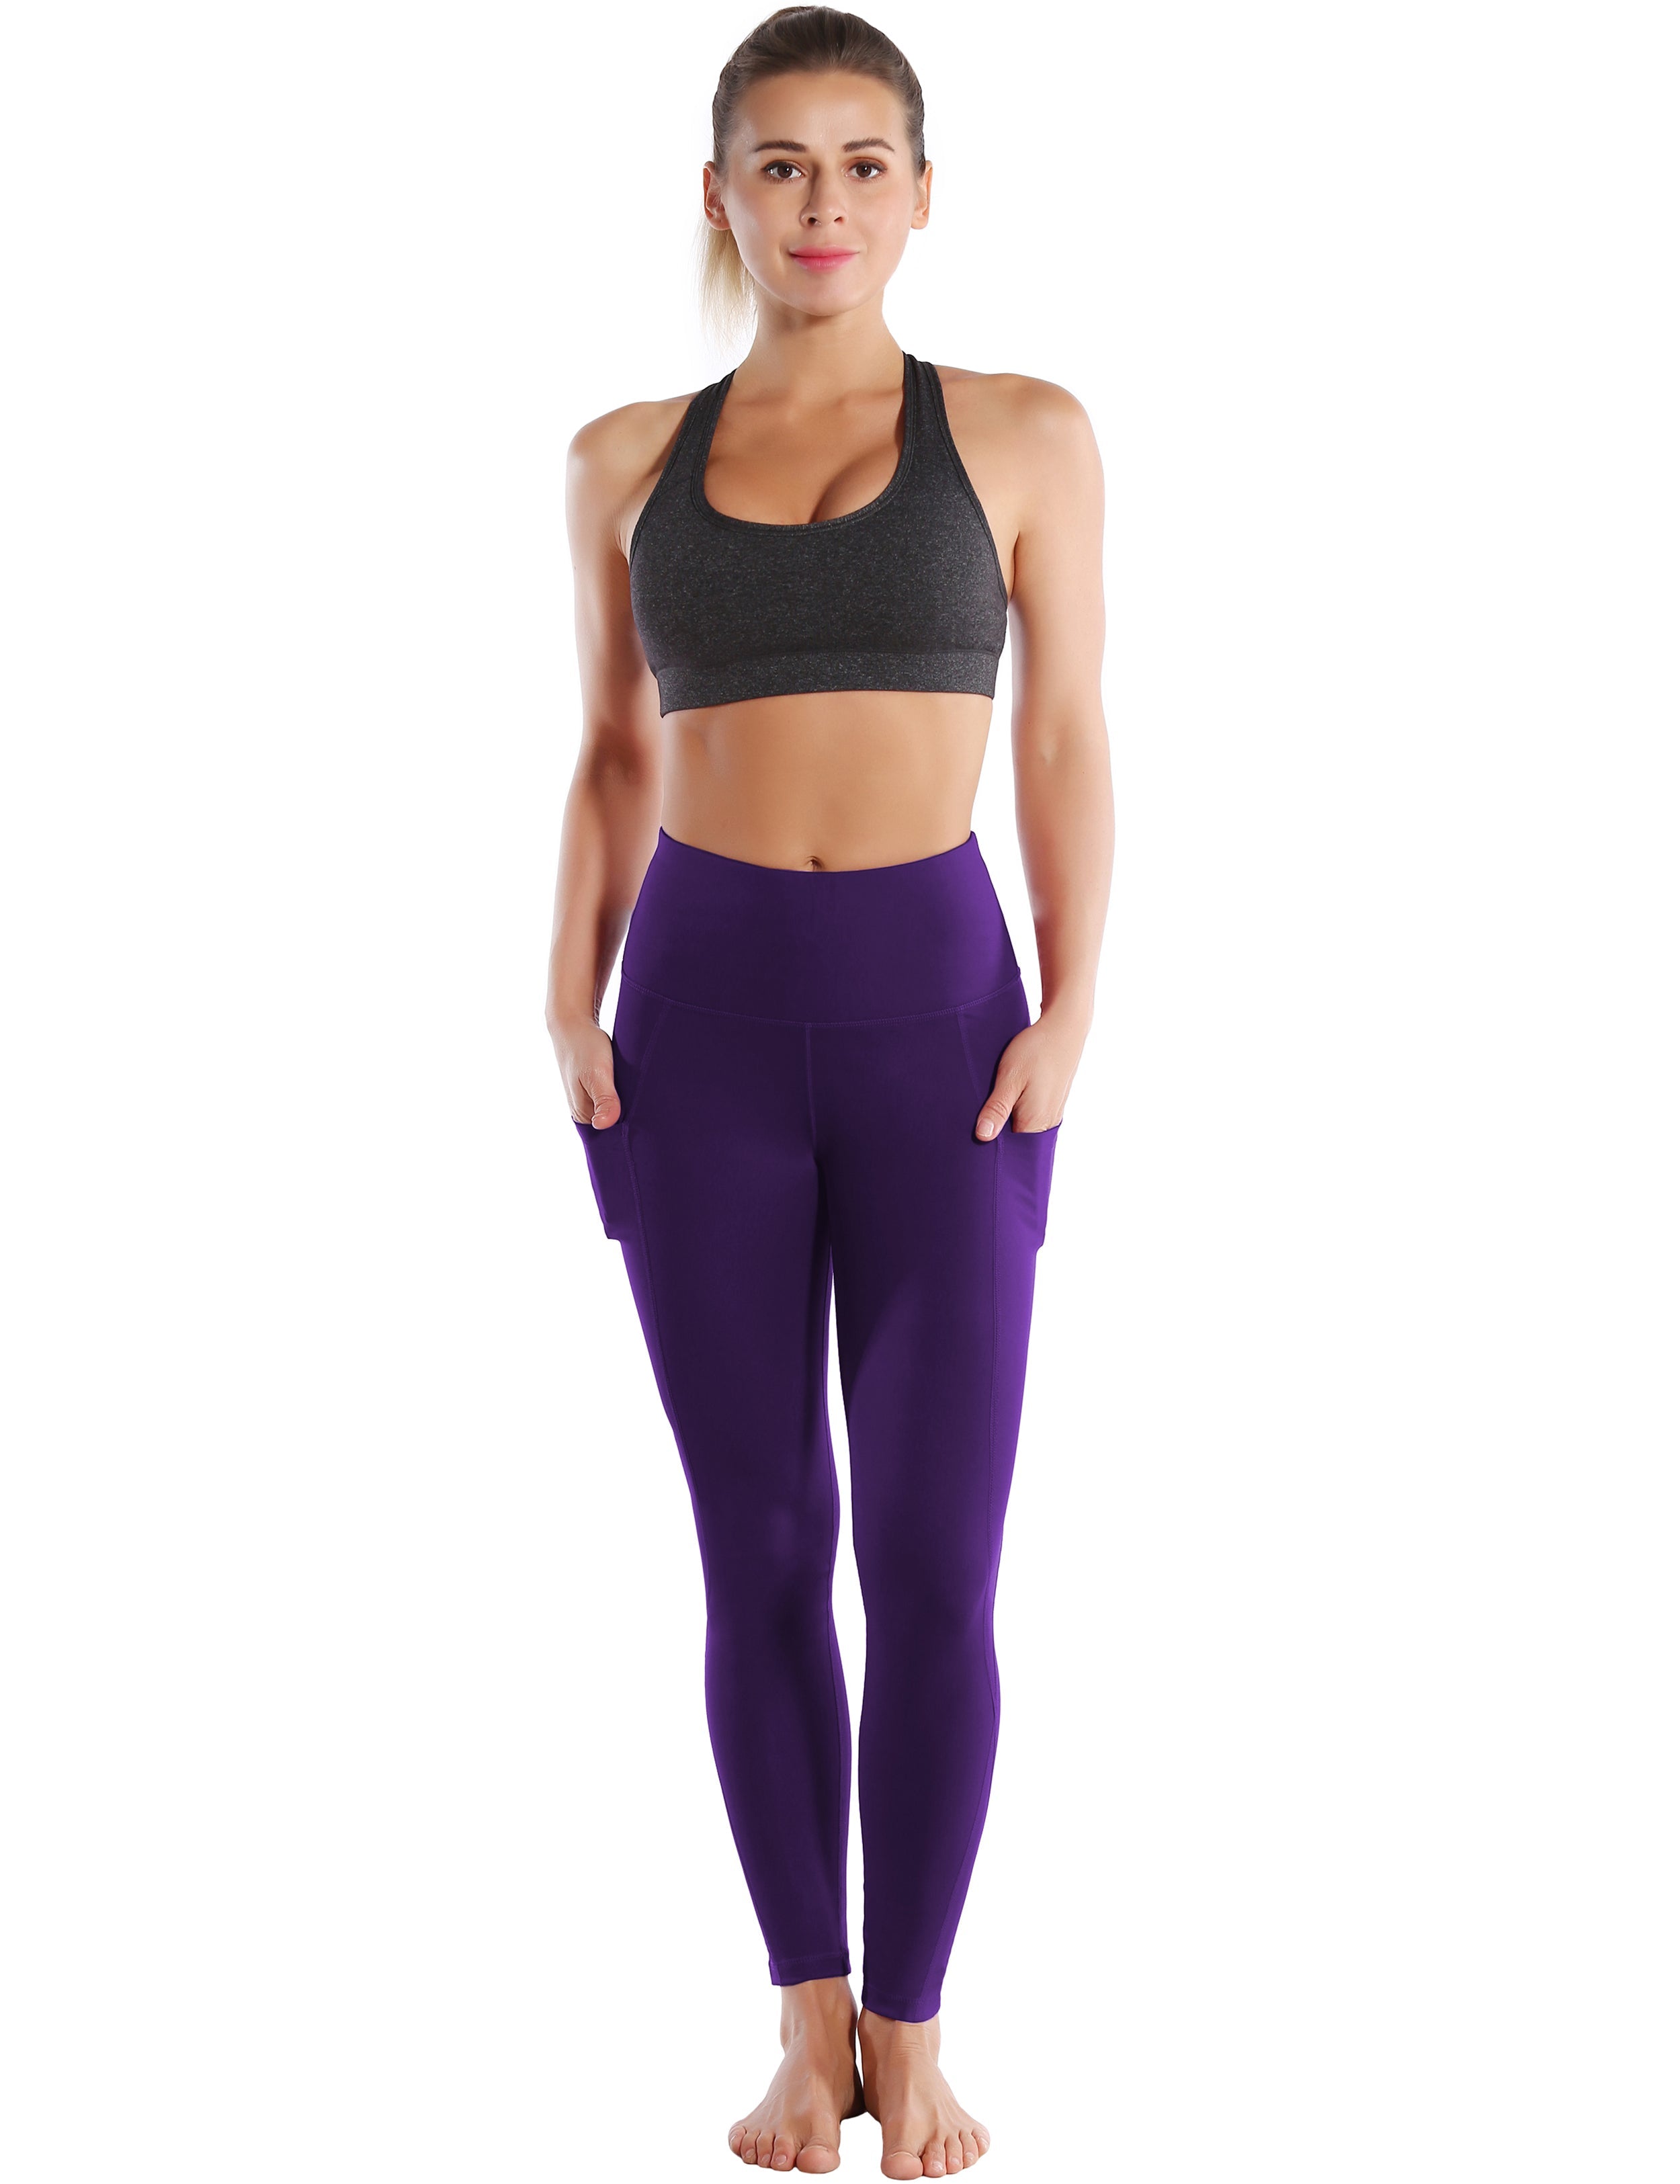 High Waist Side Pockets Gym Pants eggplantpurple 75% Nylon, 25% Spandex Fabric doesn't attract lint easily 4-way stretch No see-through Moisture-wicking Tummy control Inner pocket